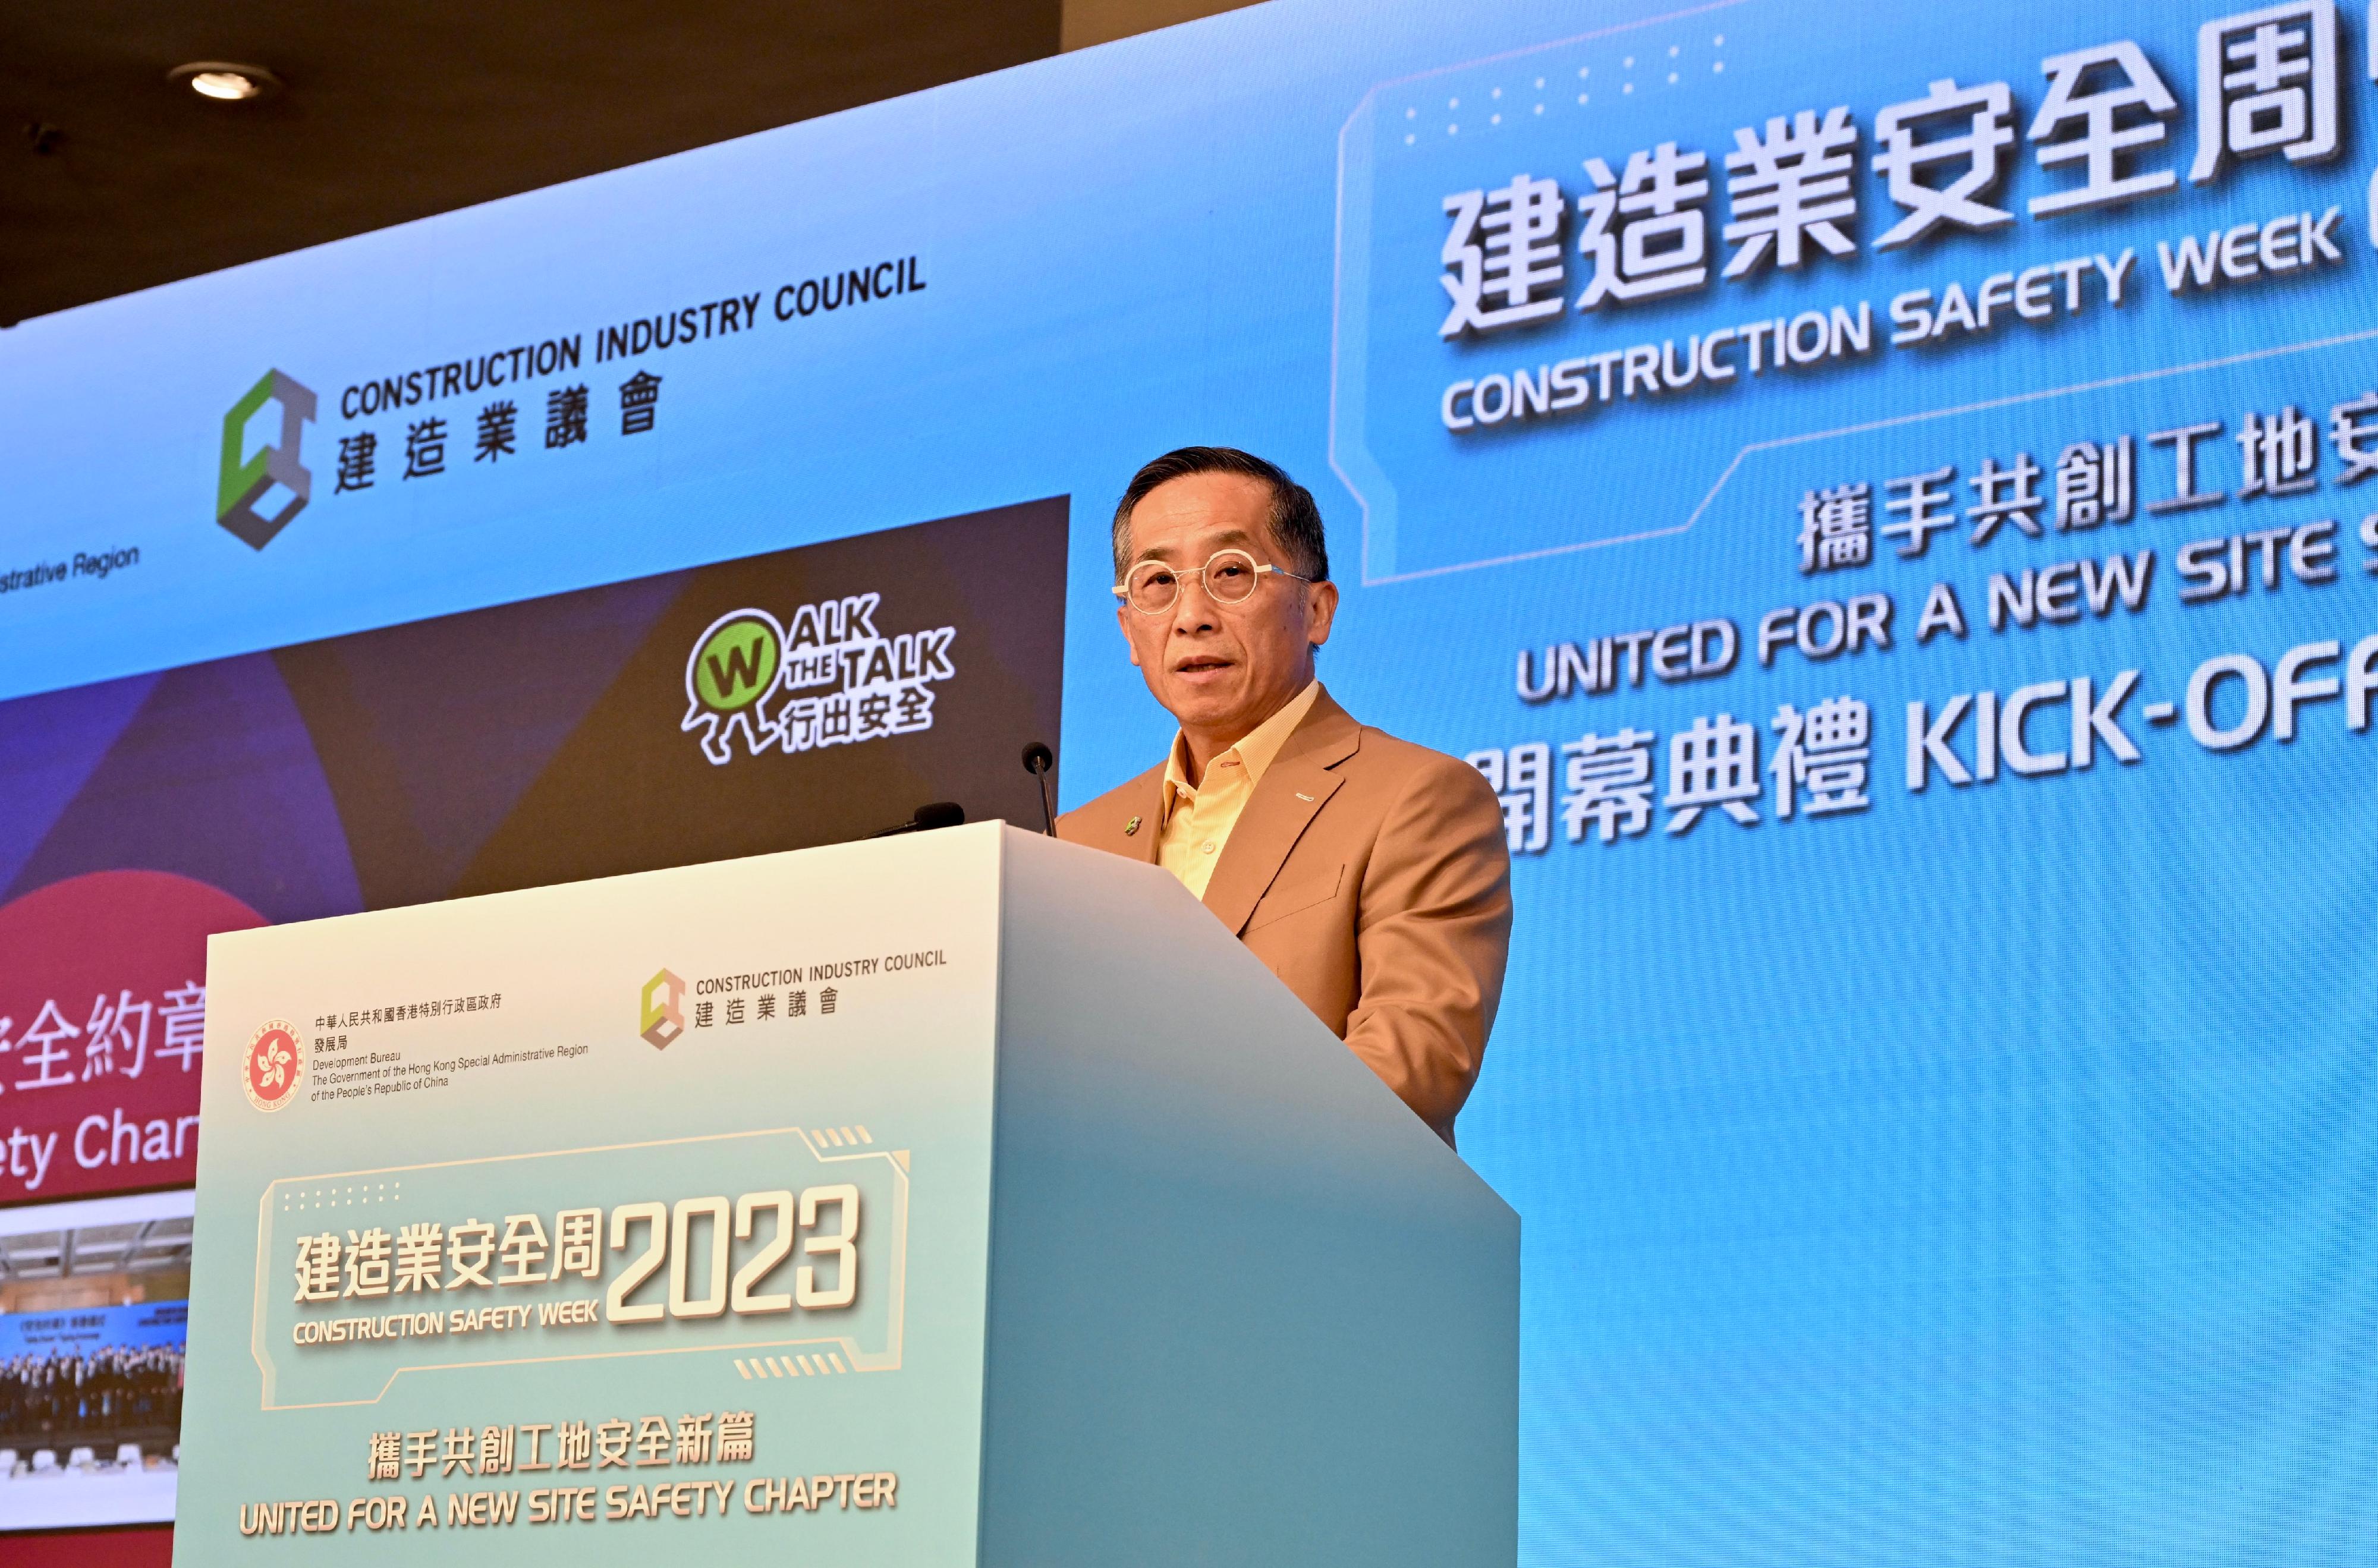 Construction Safety Week 2023 is being held from today (August 28) to September 3. Photo shows the Chairman of the Construction Industry Council, Mr Thomas Ho, speaking at the kick-off ceremony.